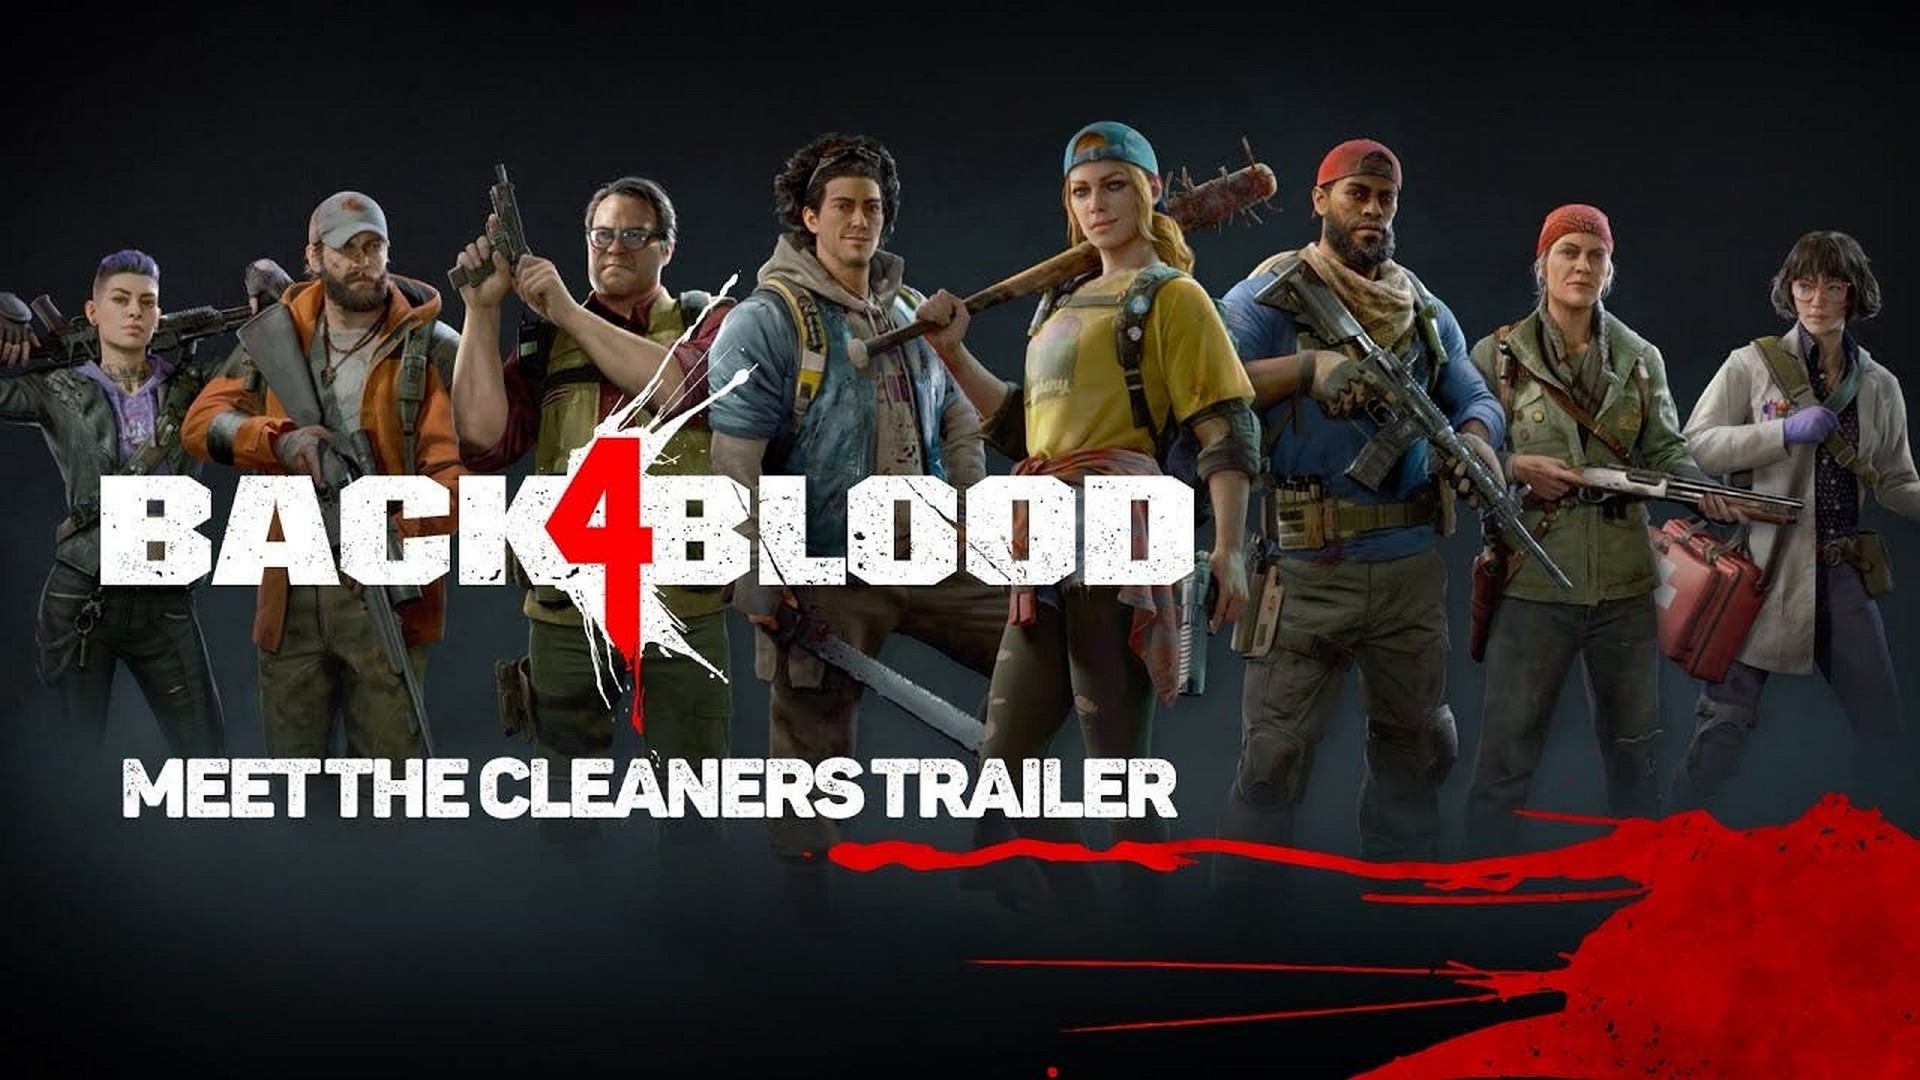 Get to Know “The Cleaners” in New Back 4 Blood Trailer